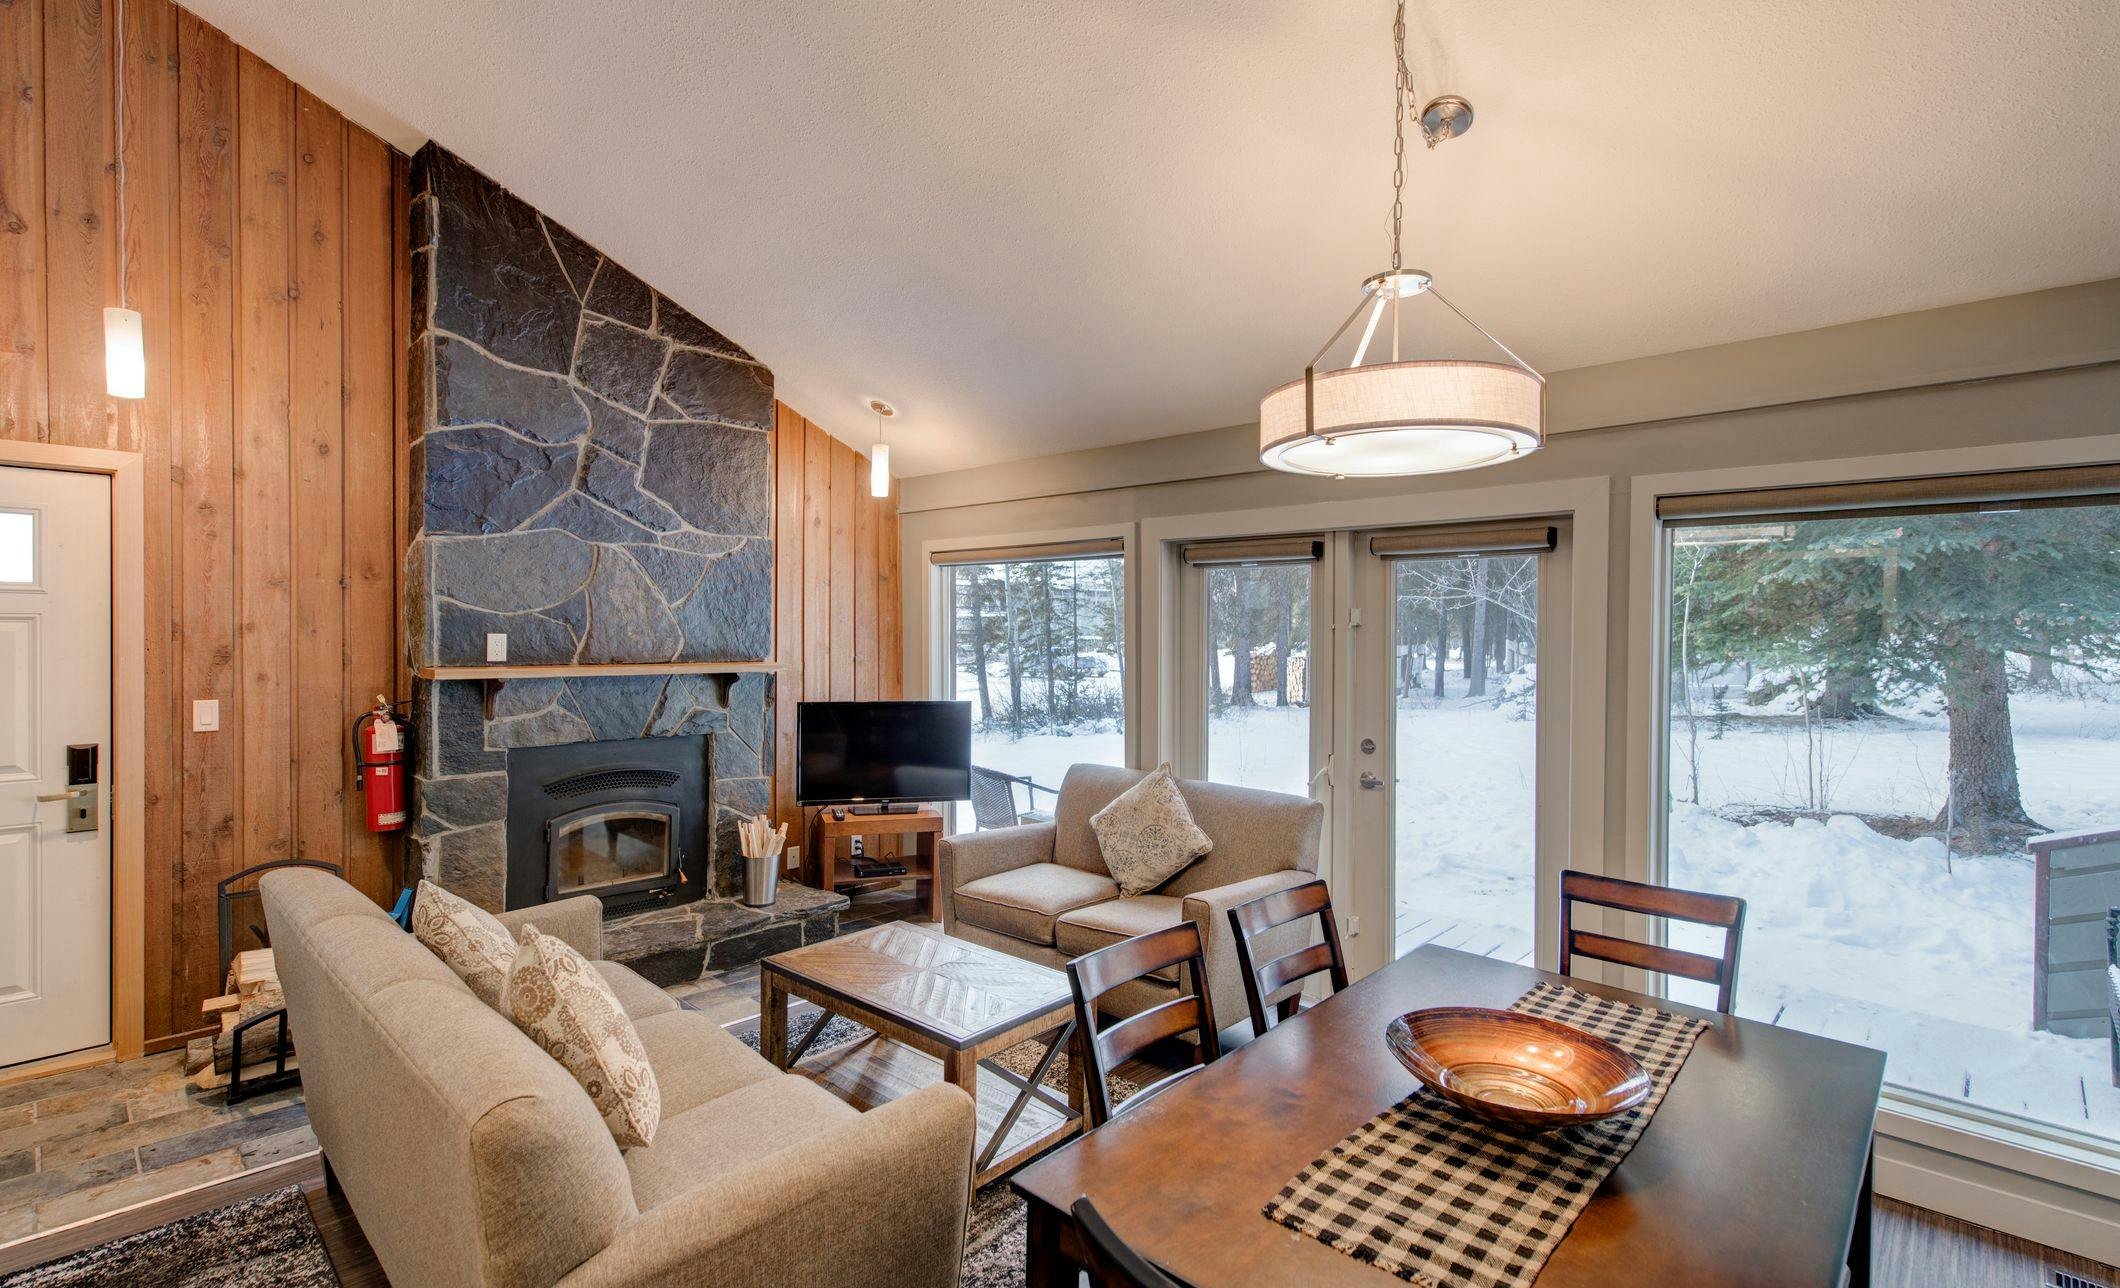 Cabin with stone fireplace, couches, and dining room table - snow outside